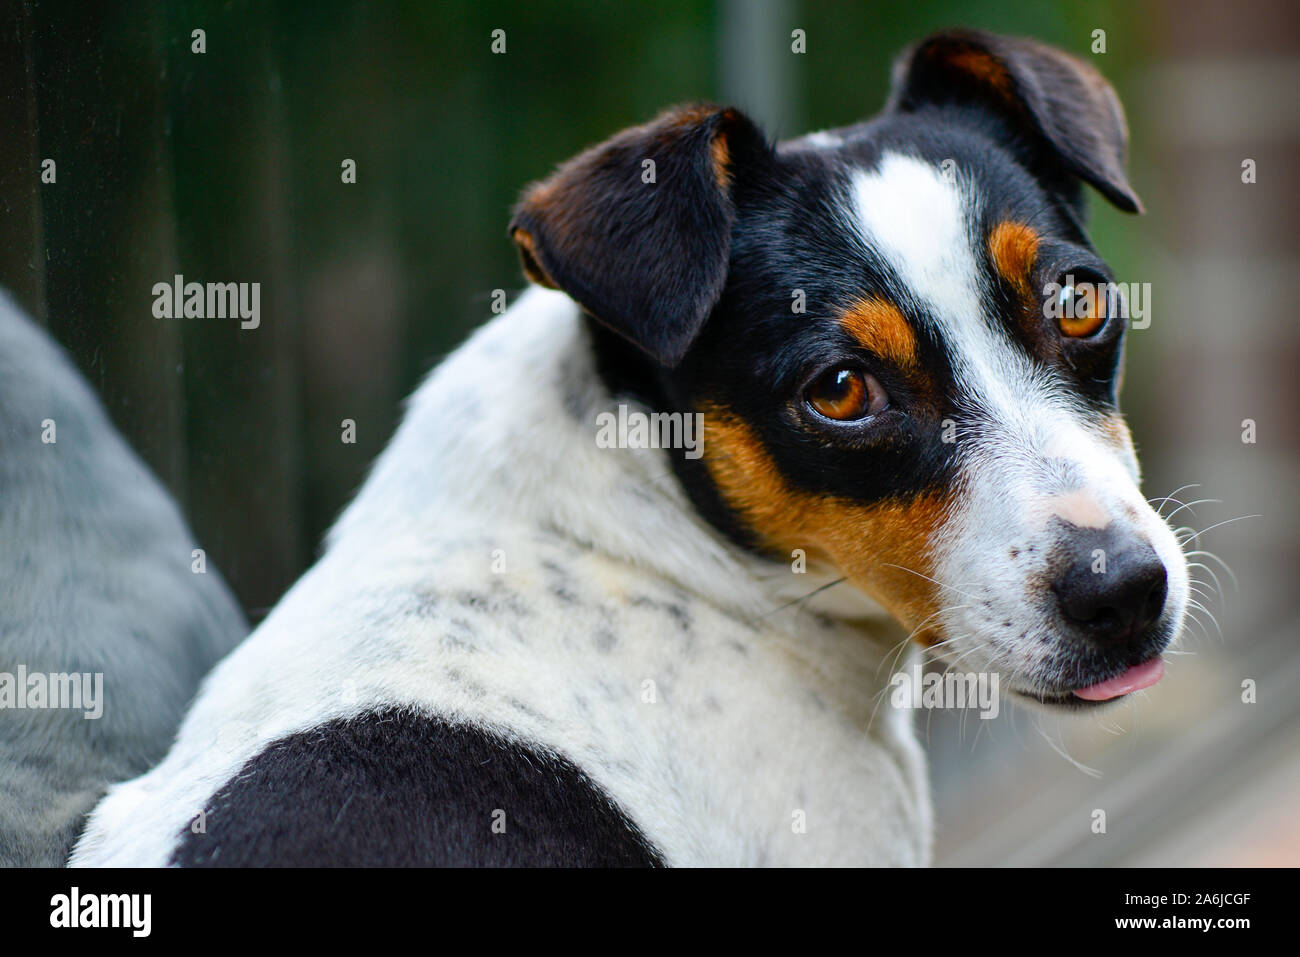 Cute Jack Russell Short Hair and Short Leg White Black and Brown Dog  Sitting and Looking and Turning Around with Tongue Partly Out Stock Photo -  Alamy